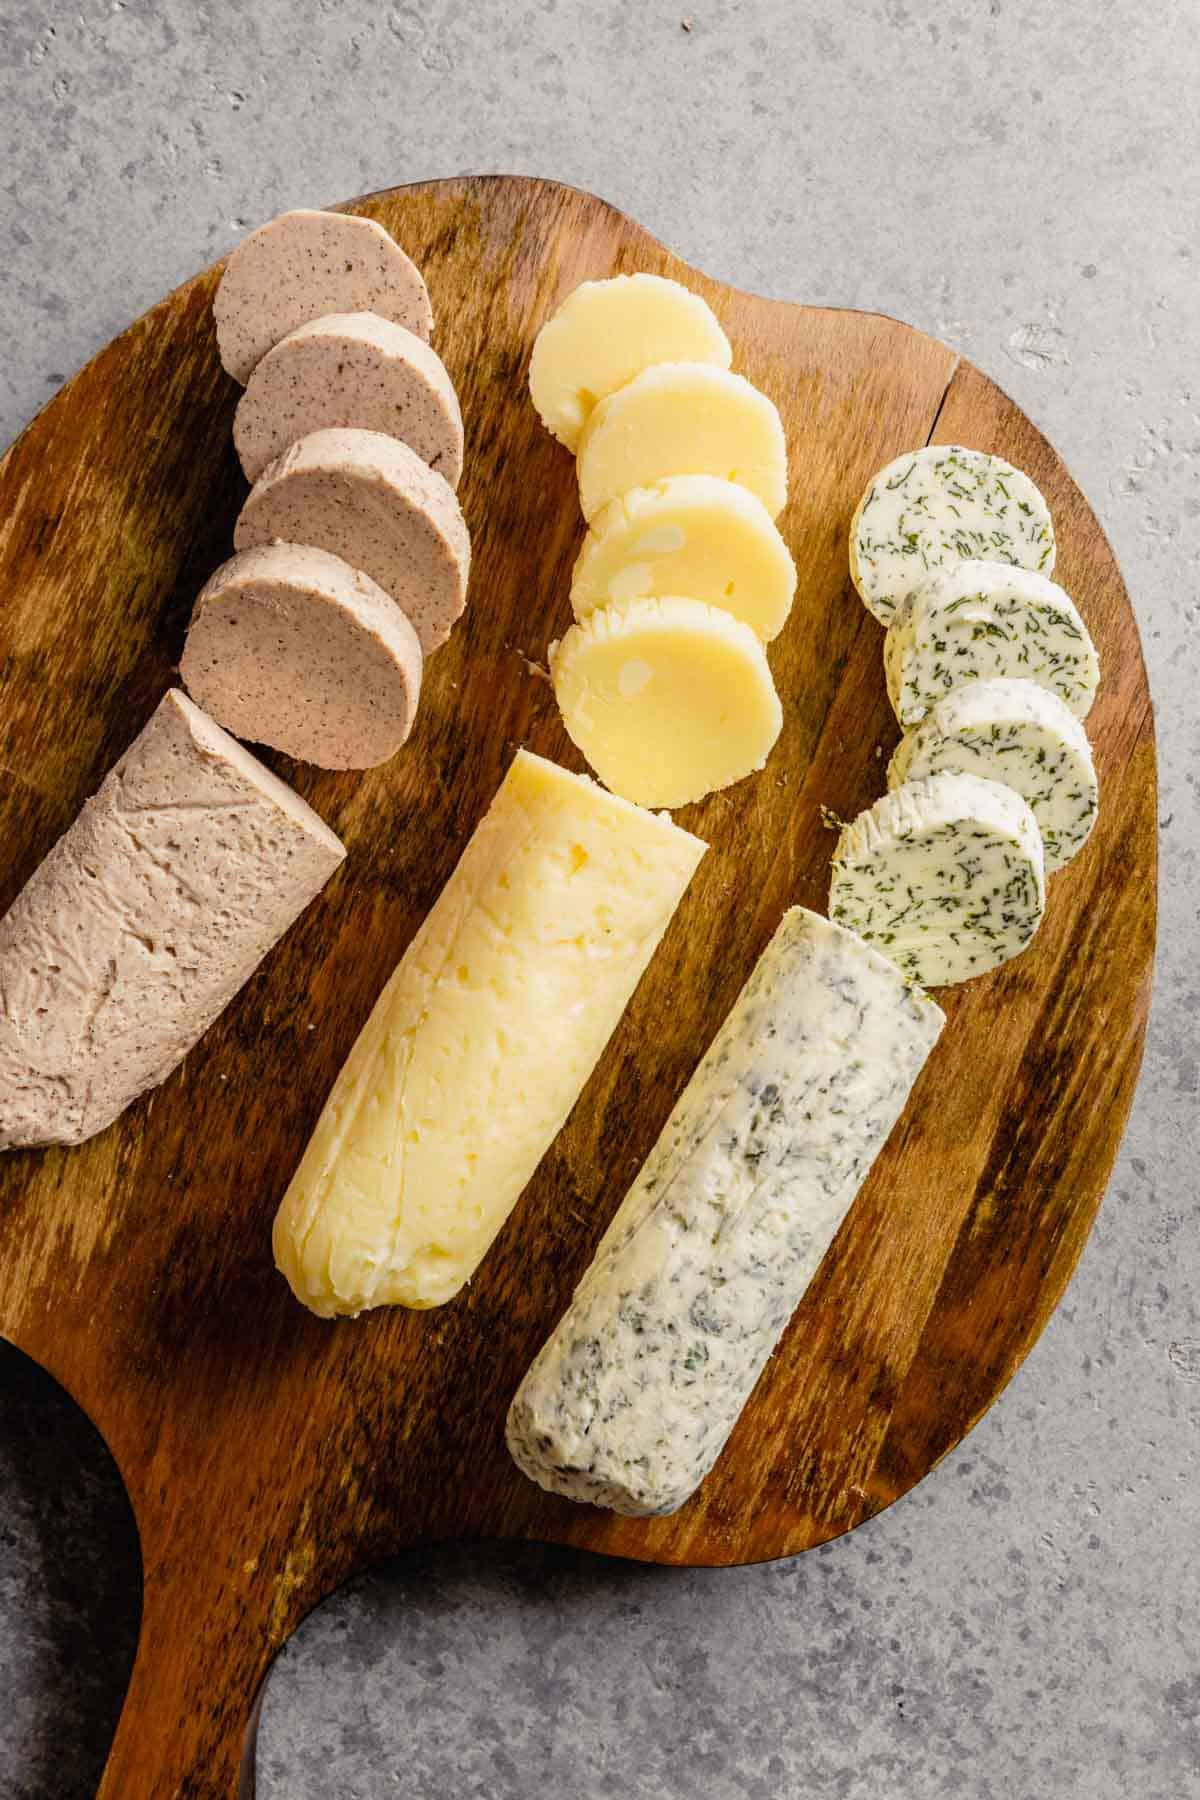 A wooden cutting board with all three types of compound butter on a grey counter.